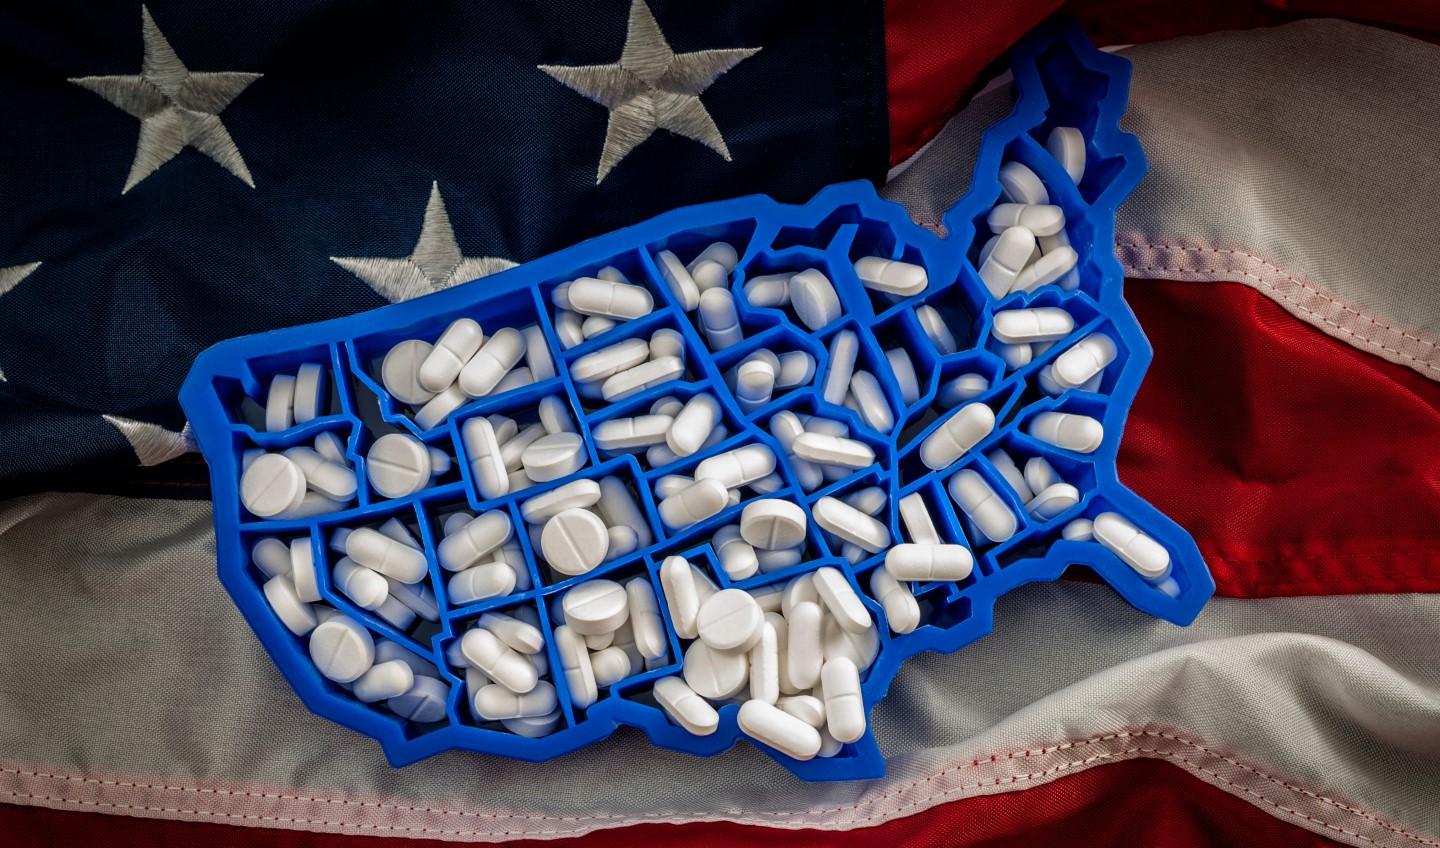 Pill box in the shape of the United States on top of an American flag